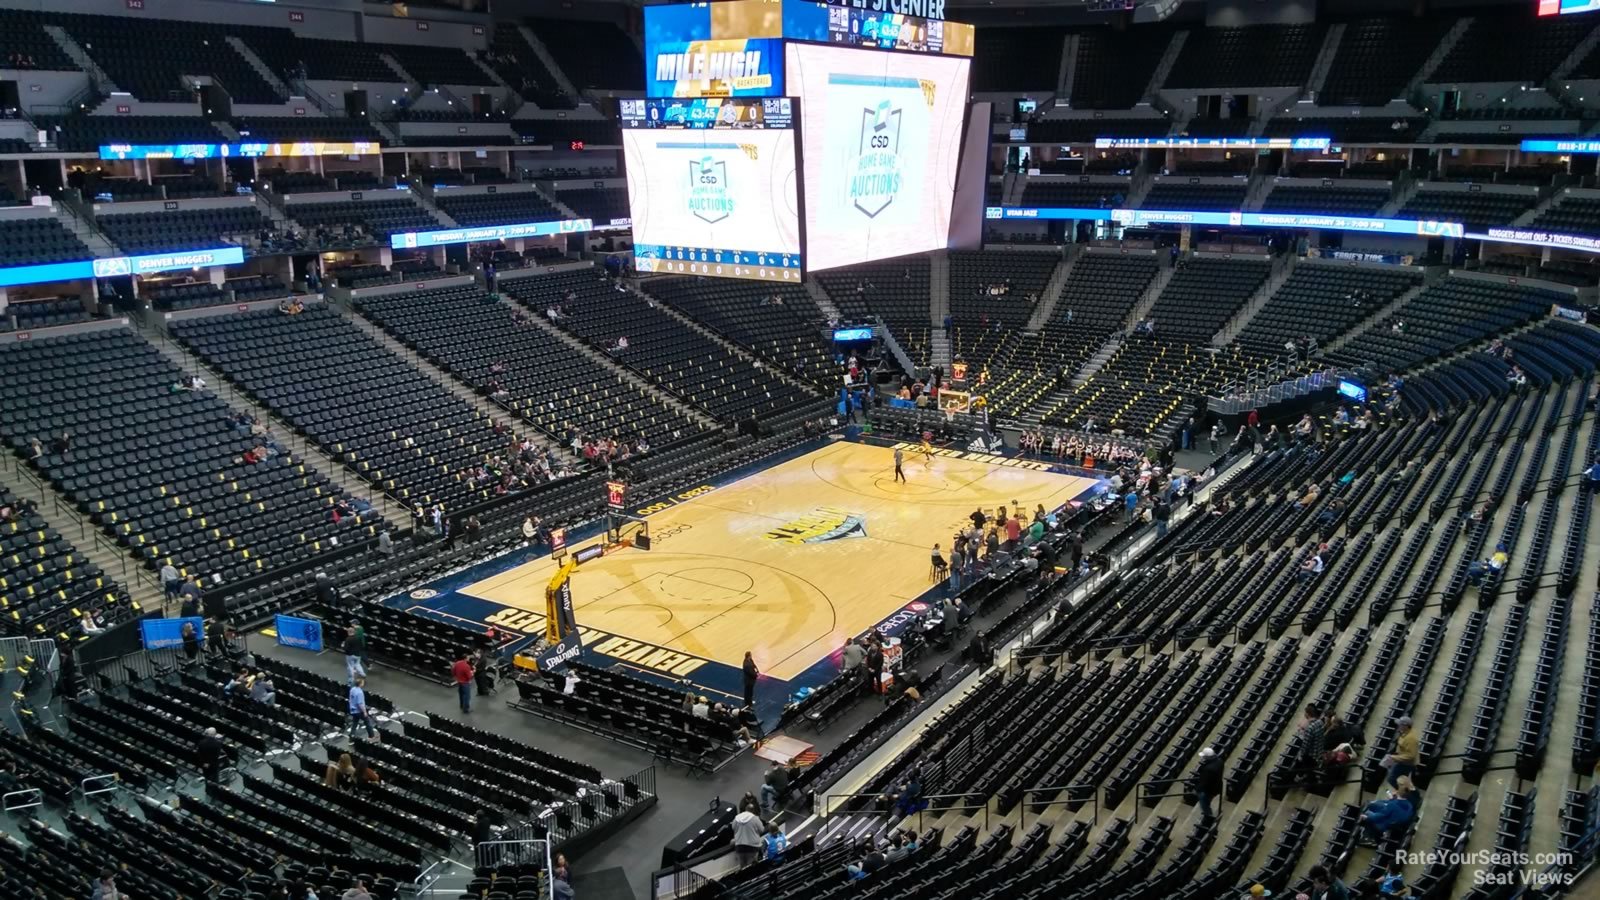 section 313, row 1 seat view  for basketball - ball arena